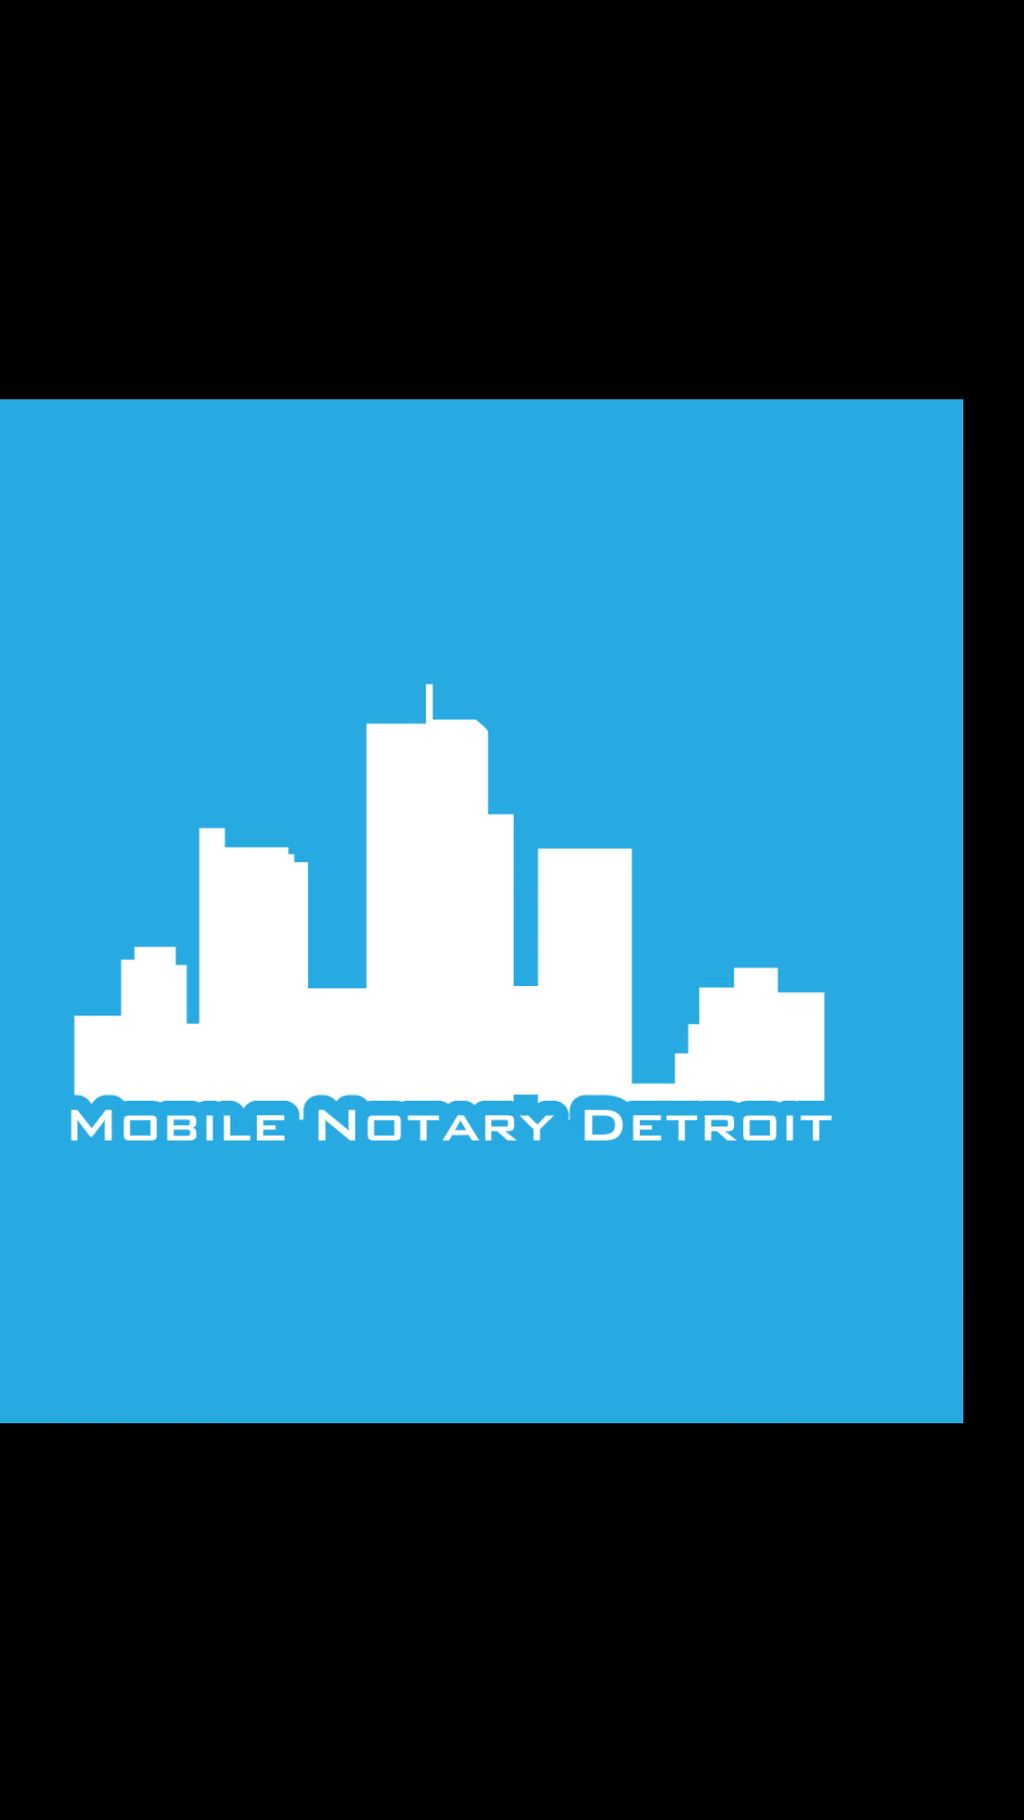 Mobile Notary Detroit